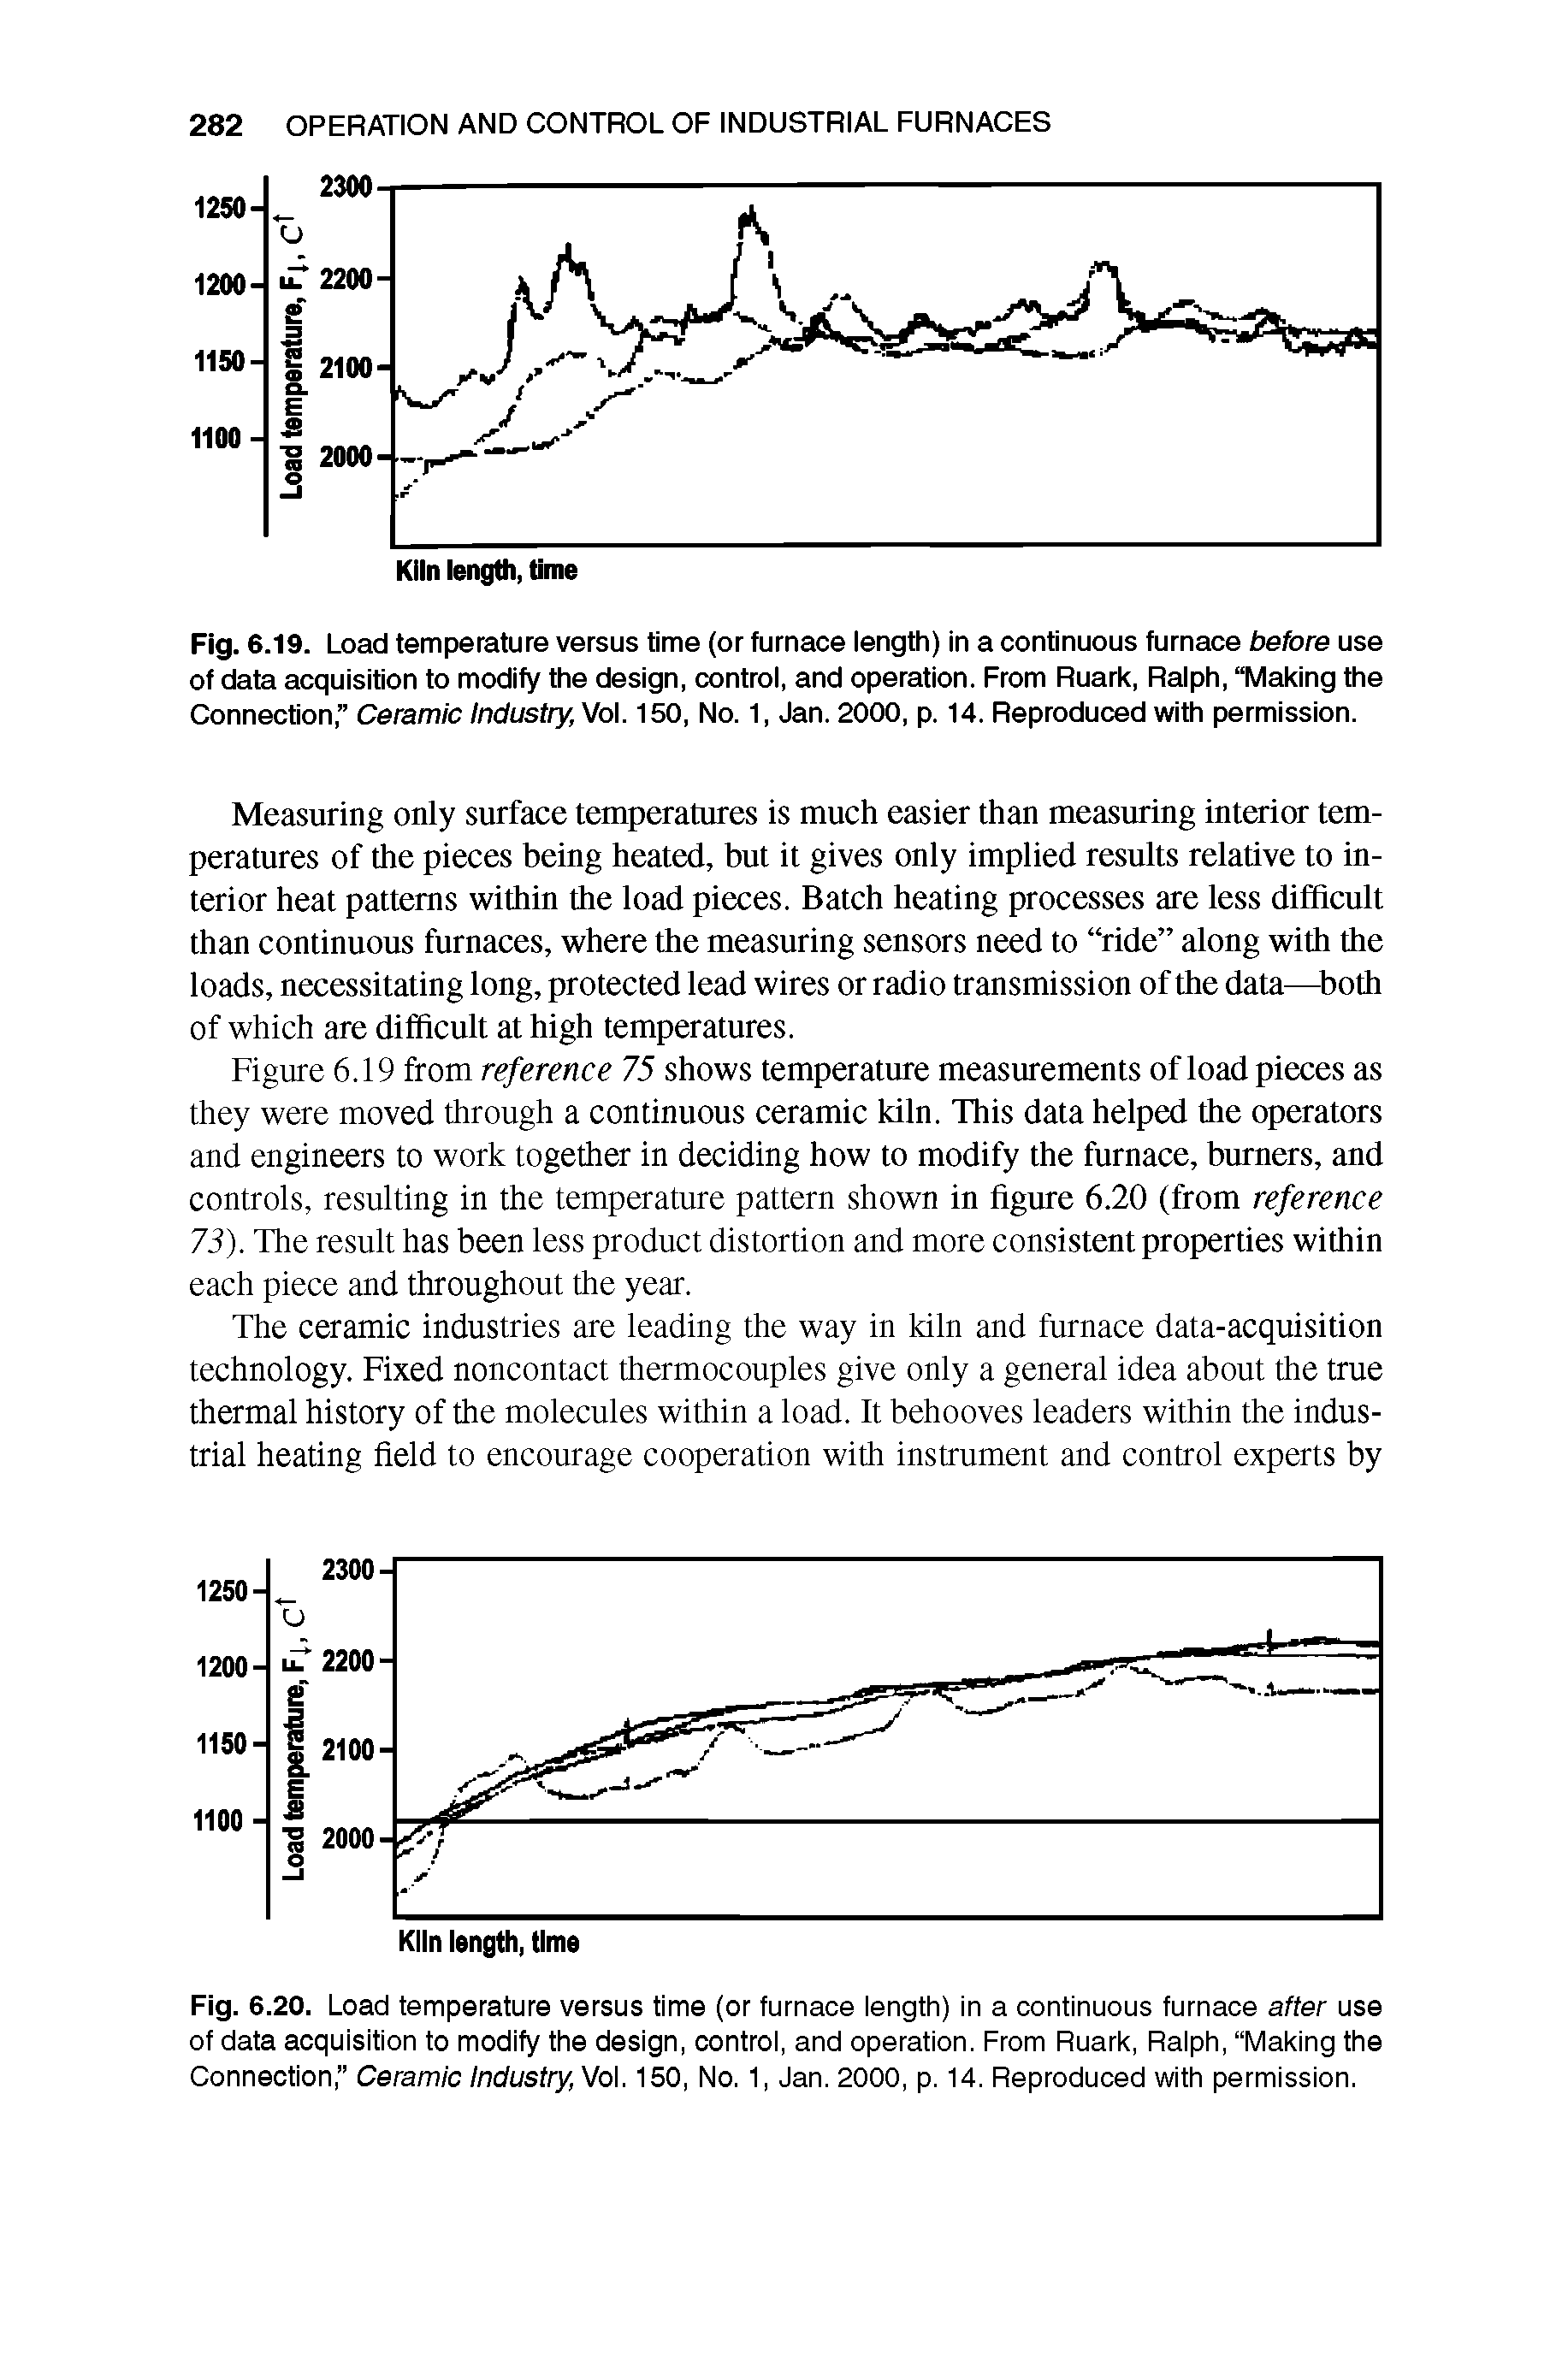 Fig. 6.19. Load temperature versus time (or furnace length) in a continuous furnace before use of data acquisition to modify the design, control, and operation. From Ruark, Ralph, Making the Connection, Ceramic Industry, /o. 150, No. 1, Jan. 2000, p. 14. Reproduced with permission.